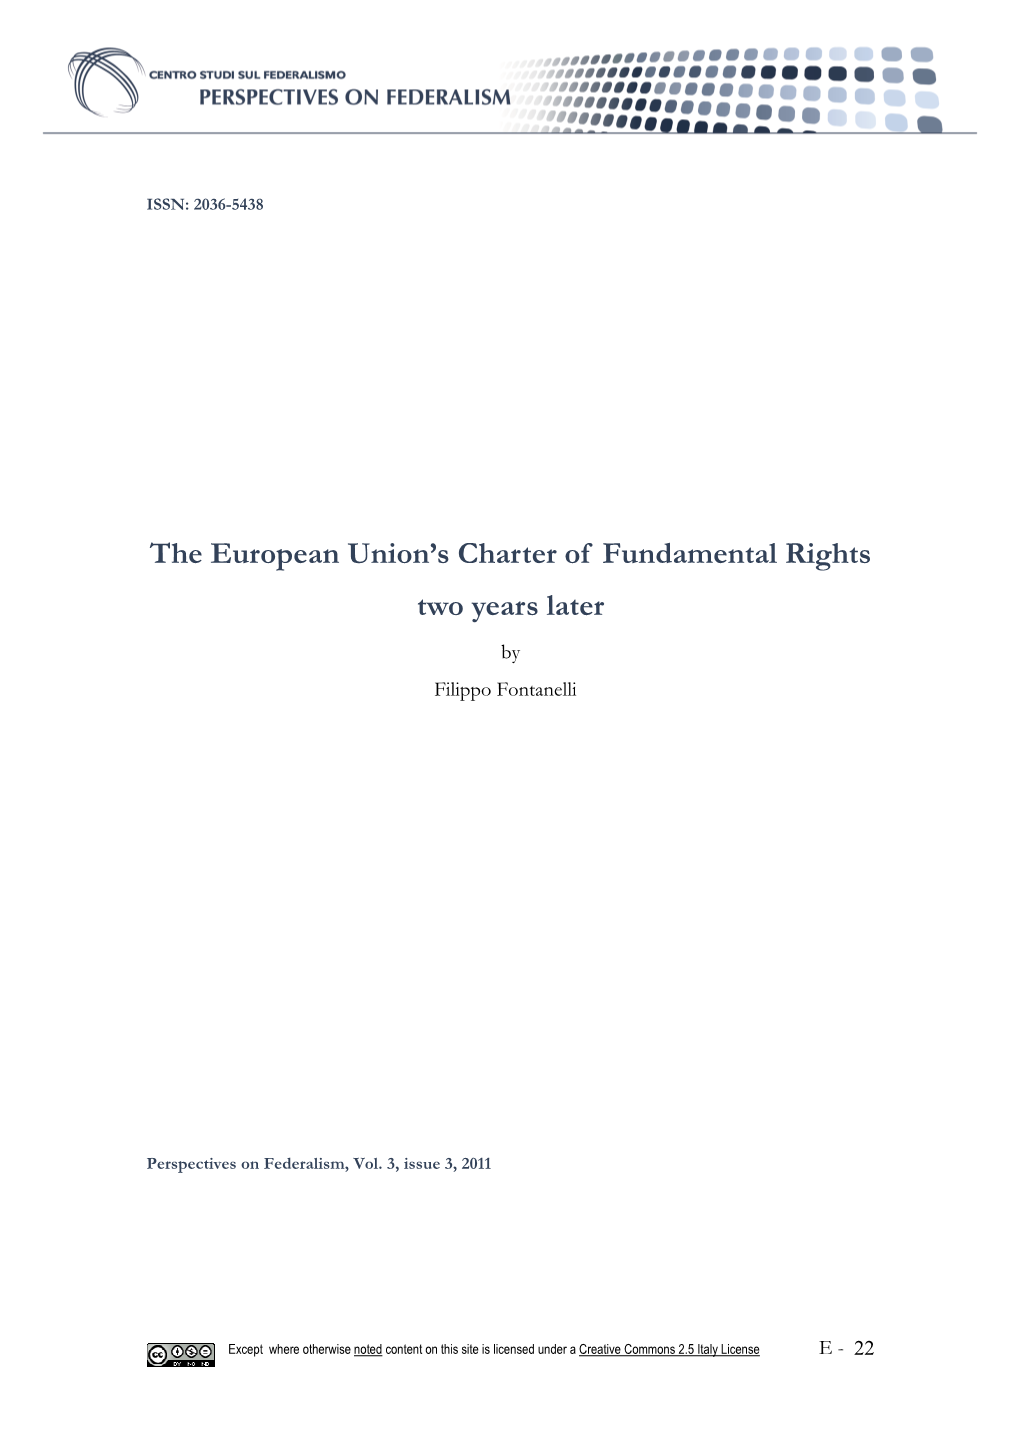 The European Union's Charter of Fundamental Rights Two Years Later